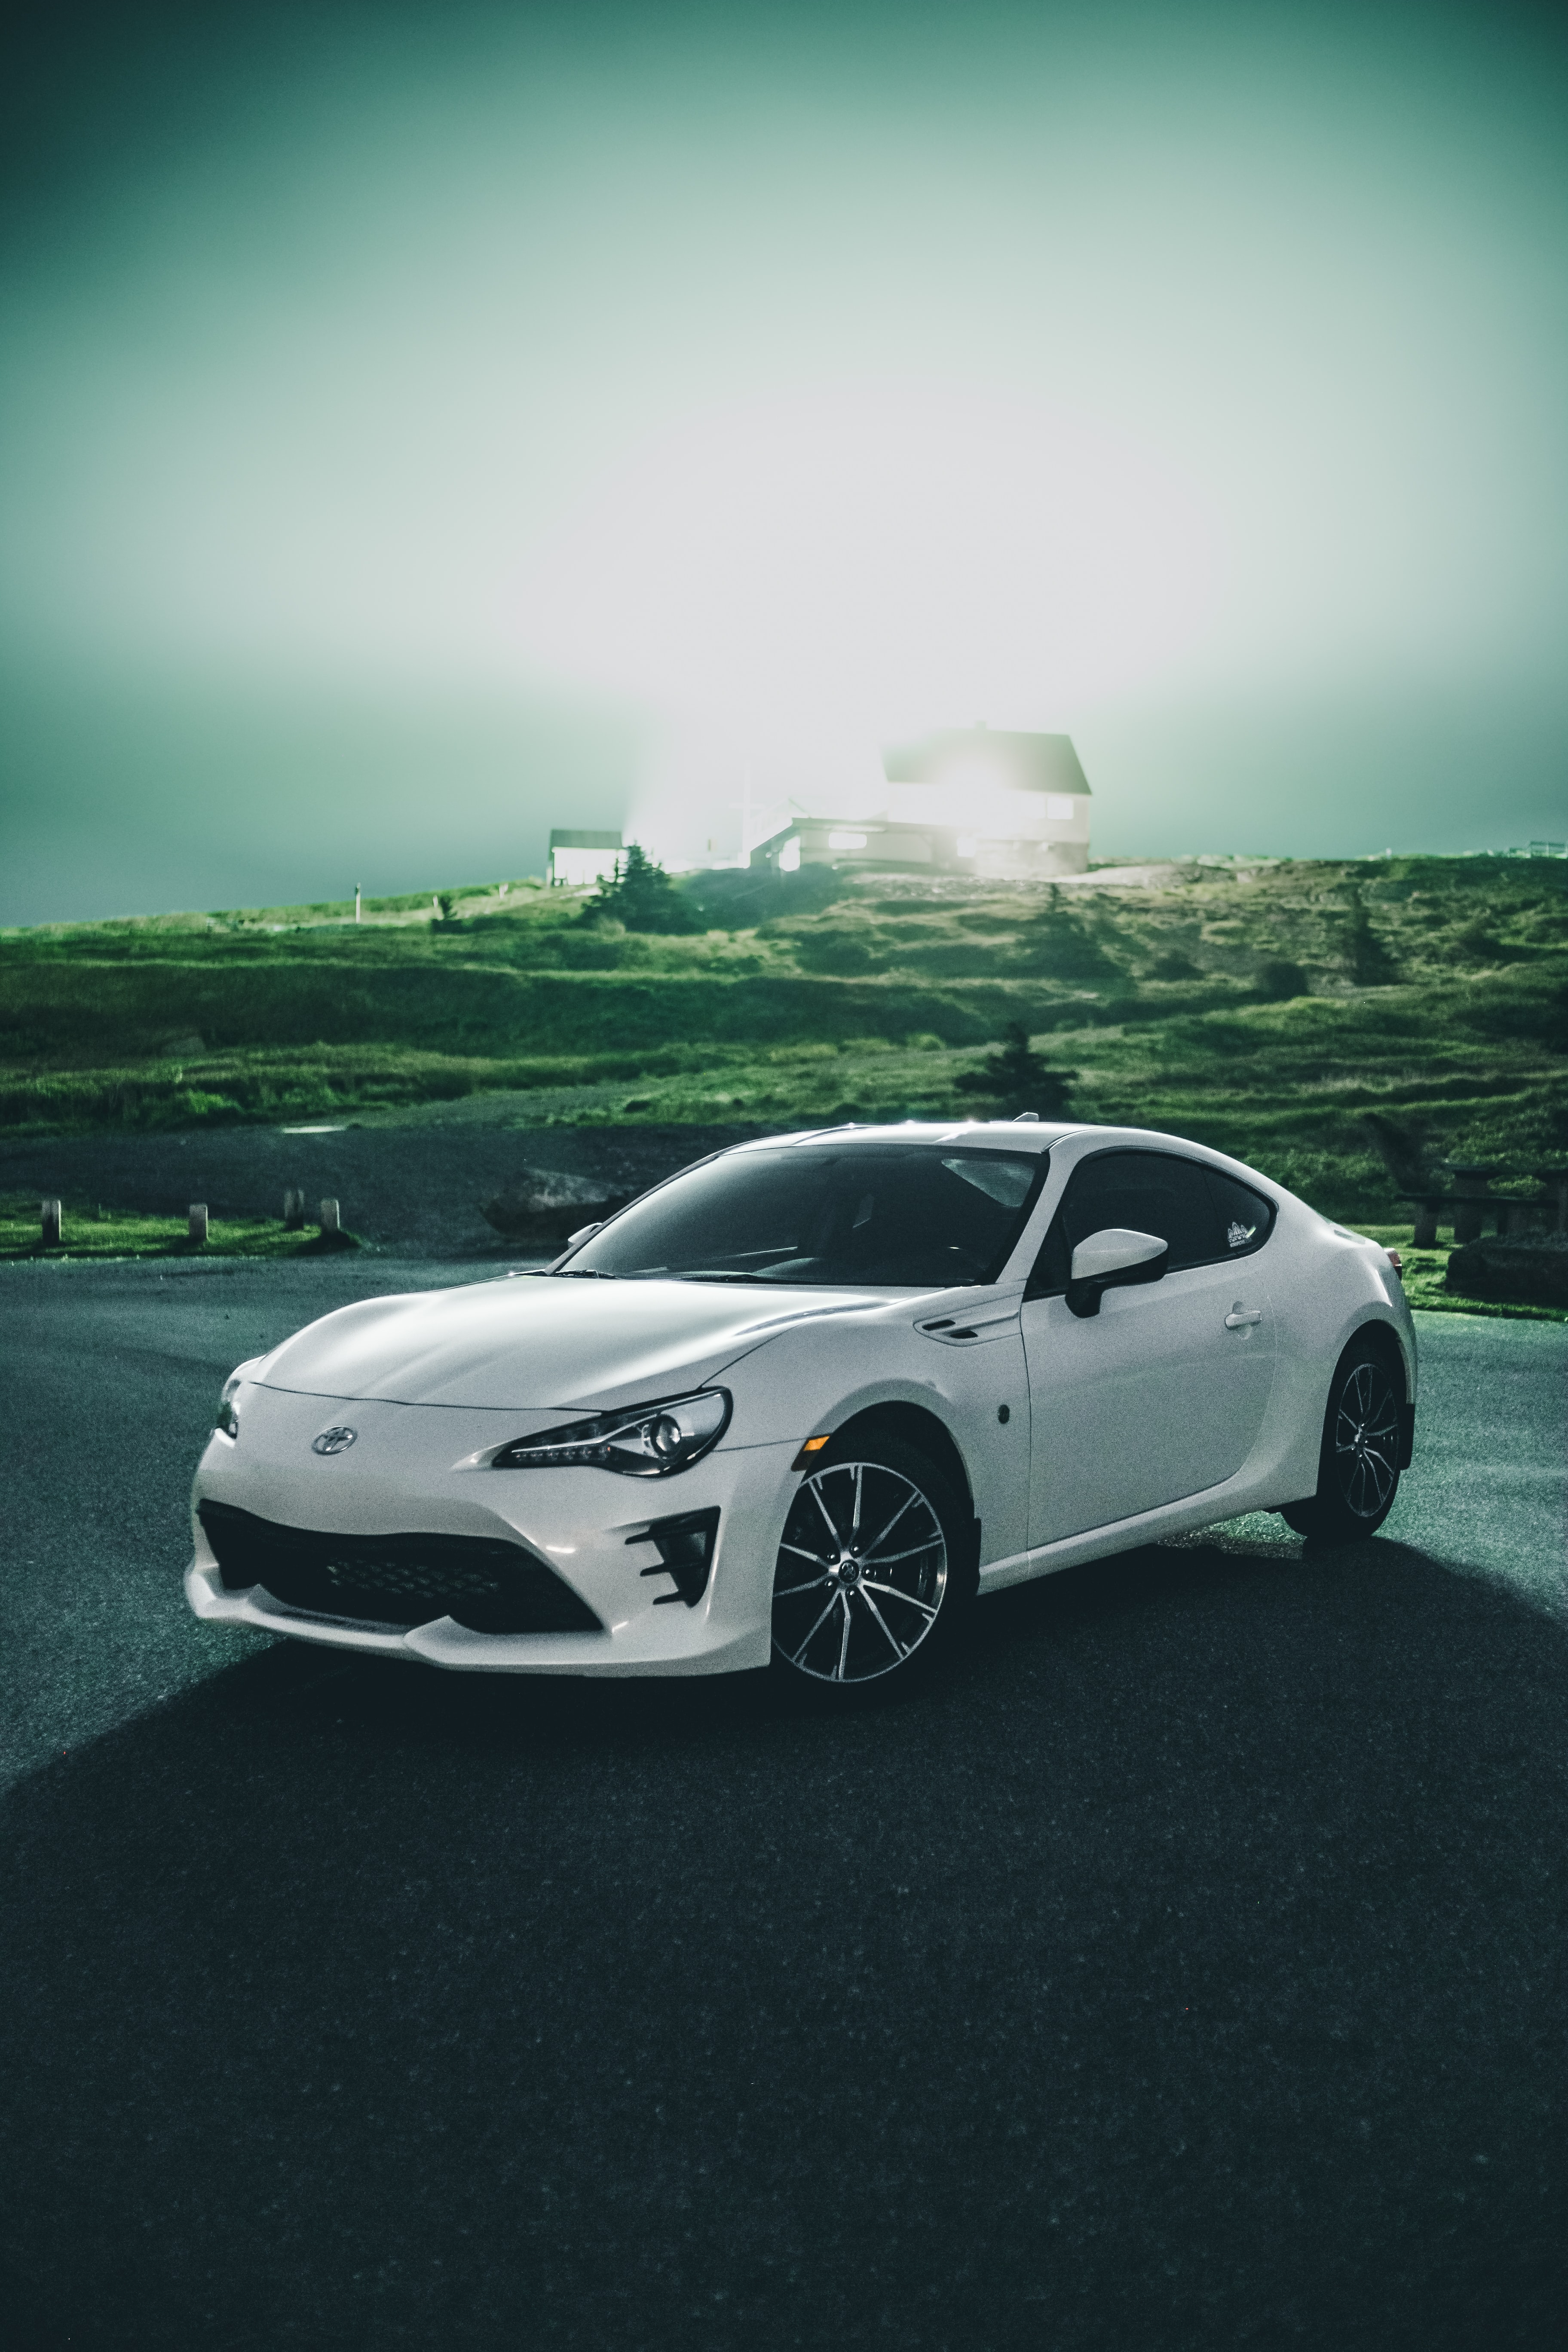 toyota, cars, sports car, sports, white, car, side view images